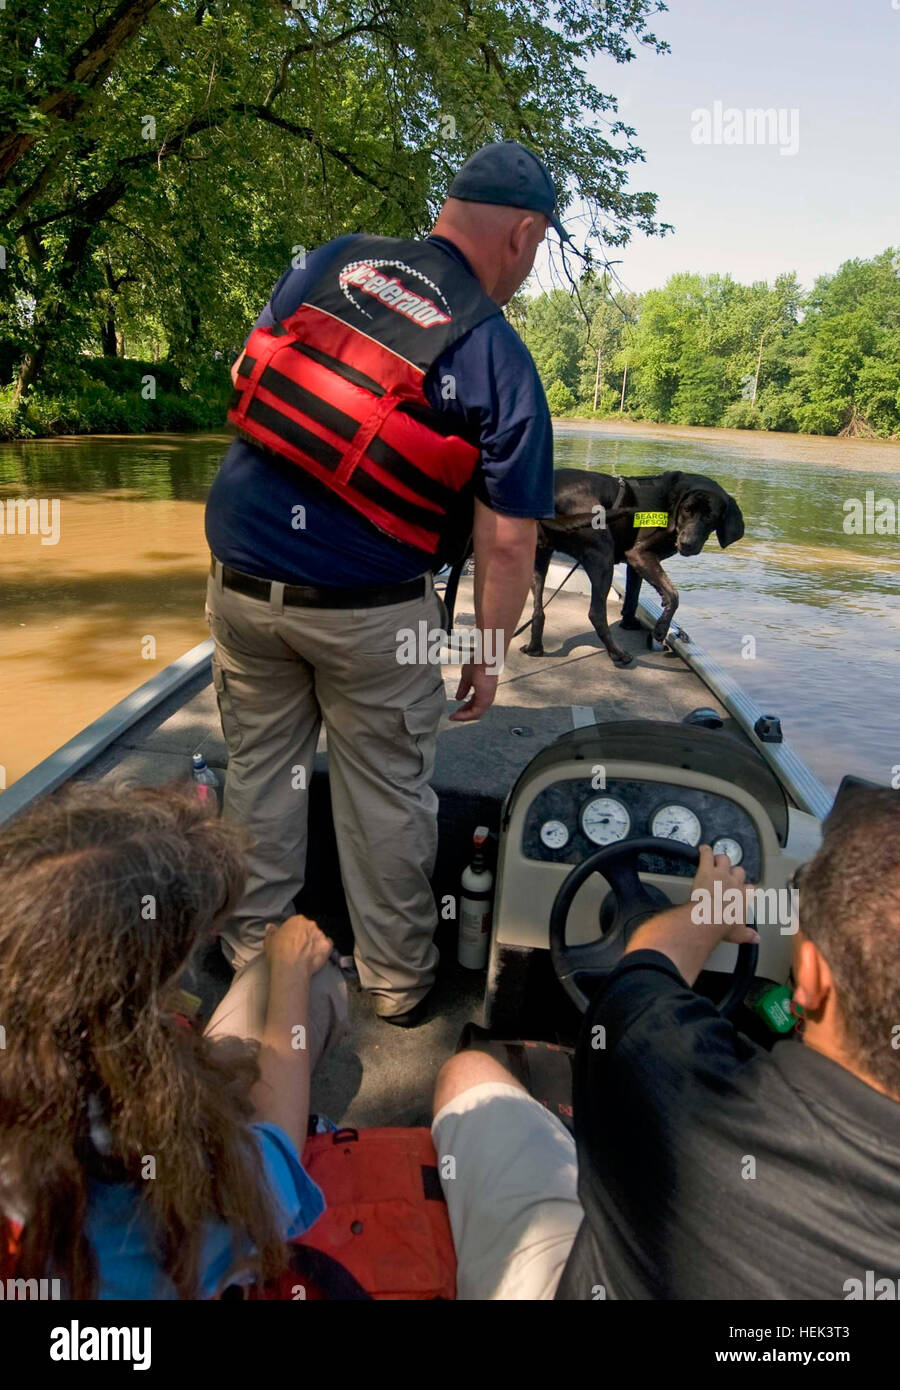 Firefighter Todd Brown, standing, and his bloodhound/ black Labrador search and rescue dog Holly track scents laid out by members of the Department of Homeland Security along the Big Blue River in Edinburgh, Ind., June 4, during the Search and Rescue Conference held at the Camp Atterbury Joint Maneuver Training Center in central Indiana. Brown and Holly work for the New Chapel Fire Department in Floyd County, Indiana. Search and Rescue Dogs Train in Indiana Waters 287976 Stock Photo